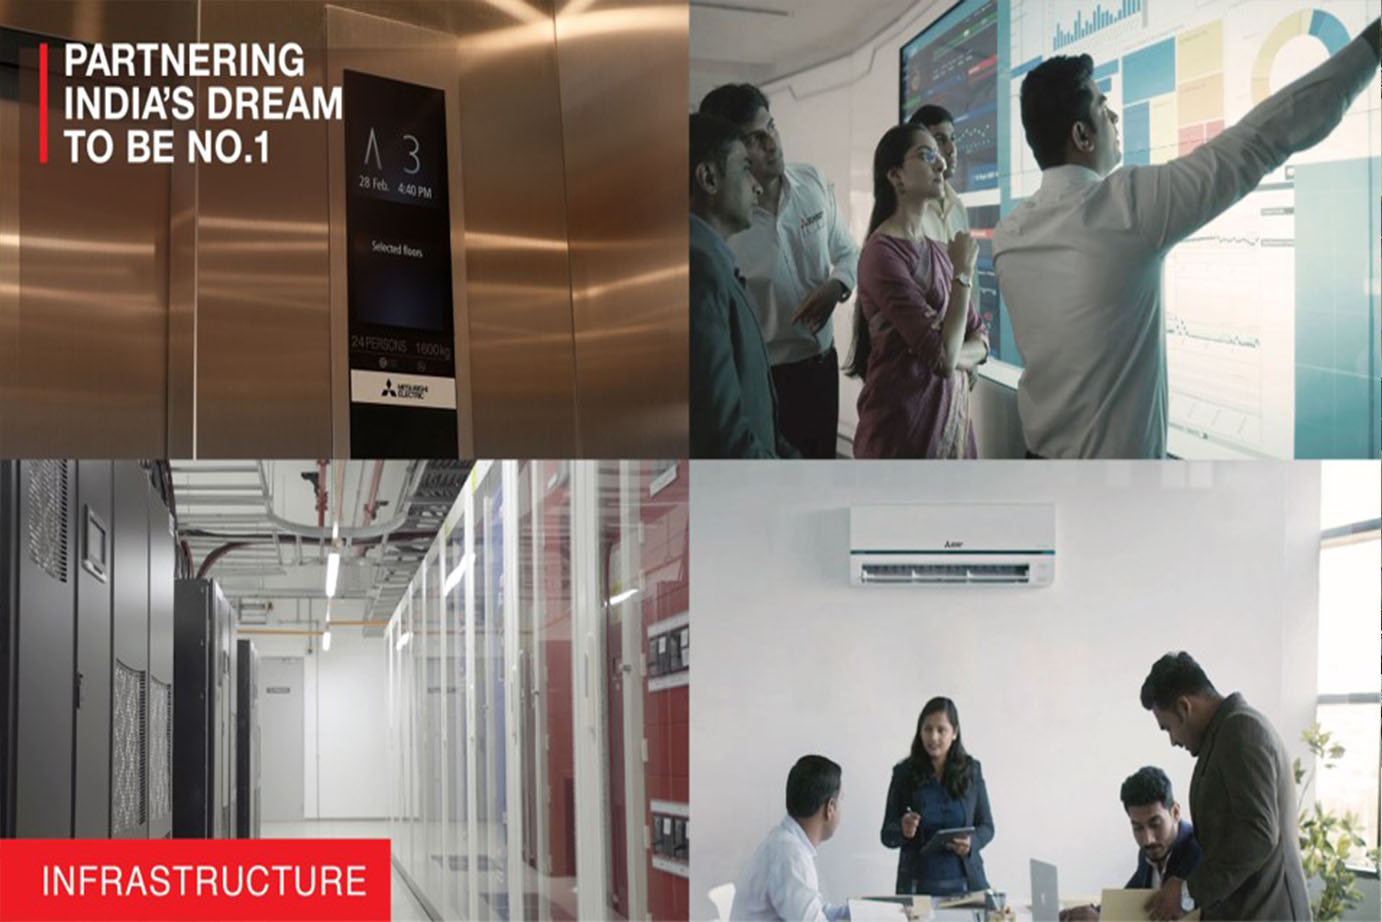 Mitsubishi Electric Launches New Digital Advertising Campaign in India